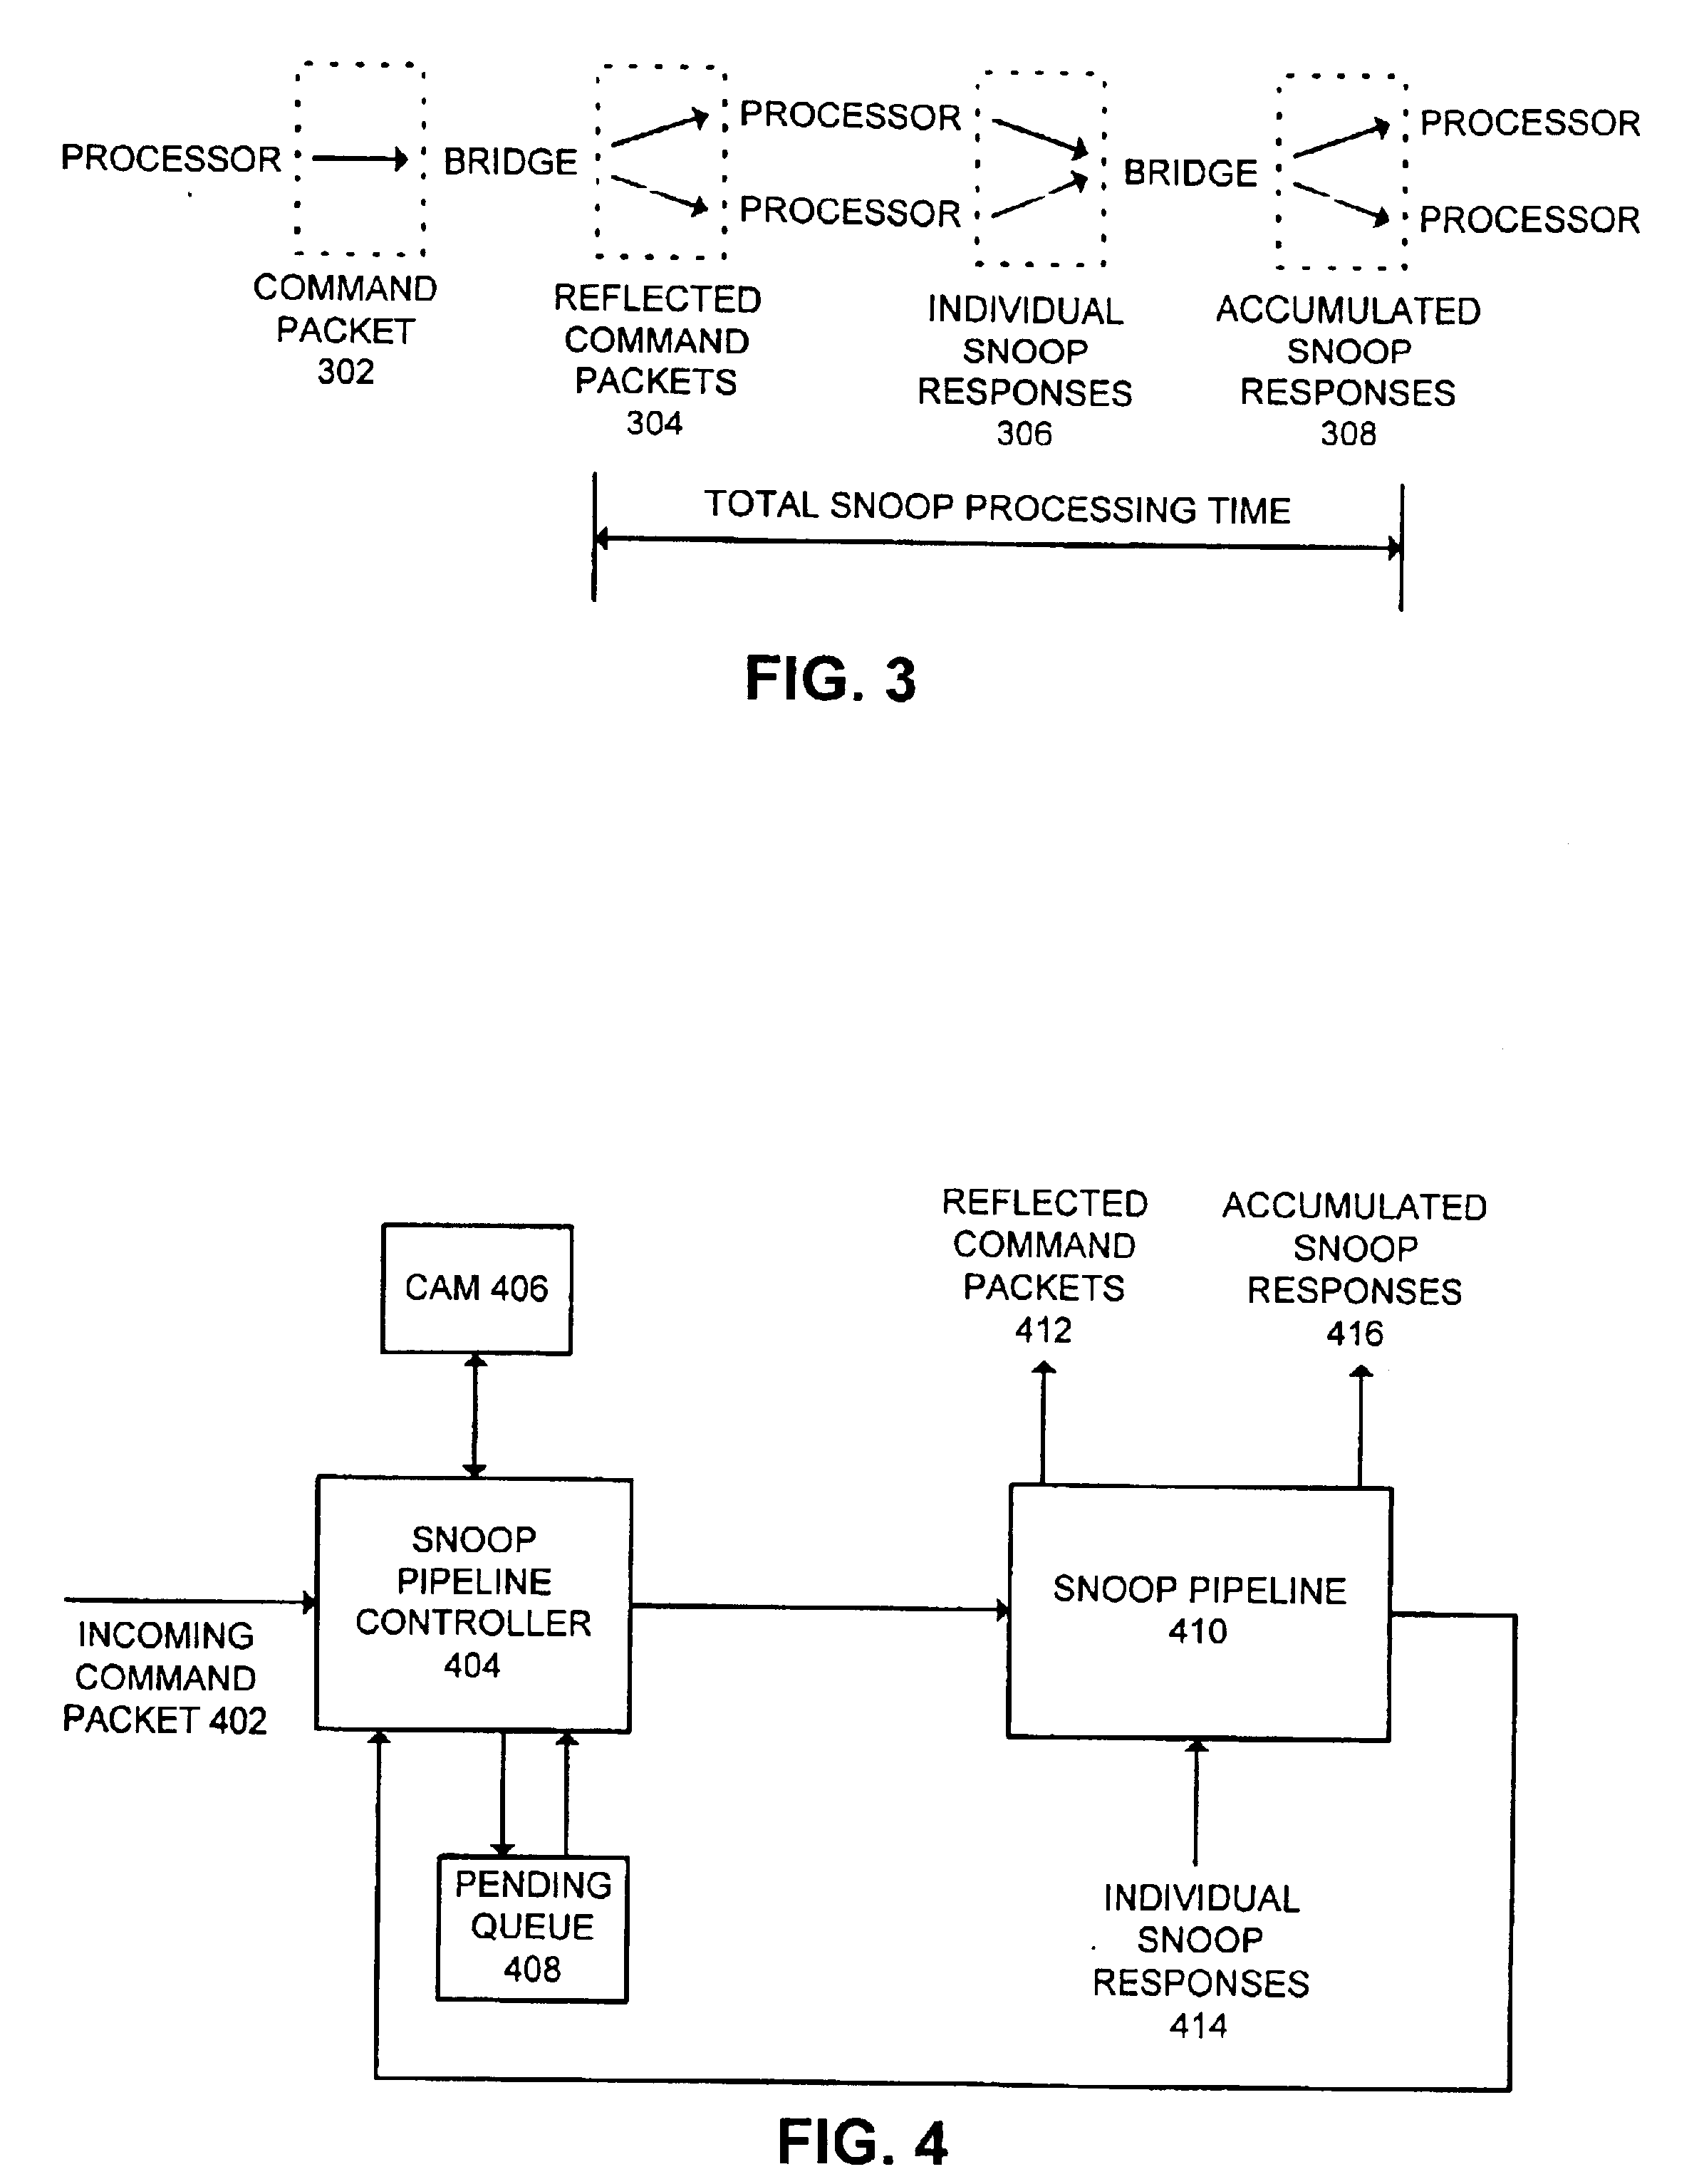 Pipelining cache-coherence operations in a shared-memory multiprocessing system